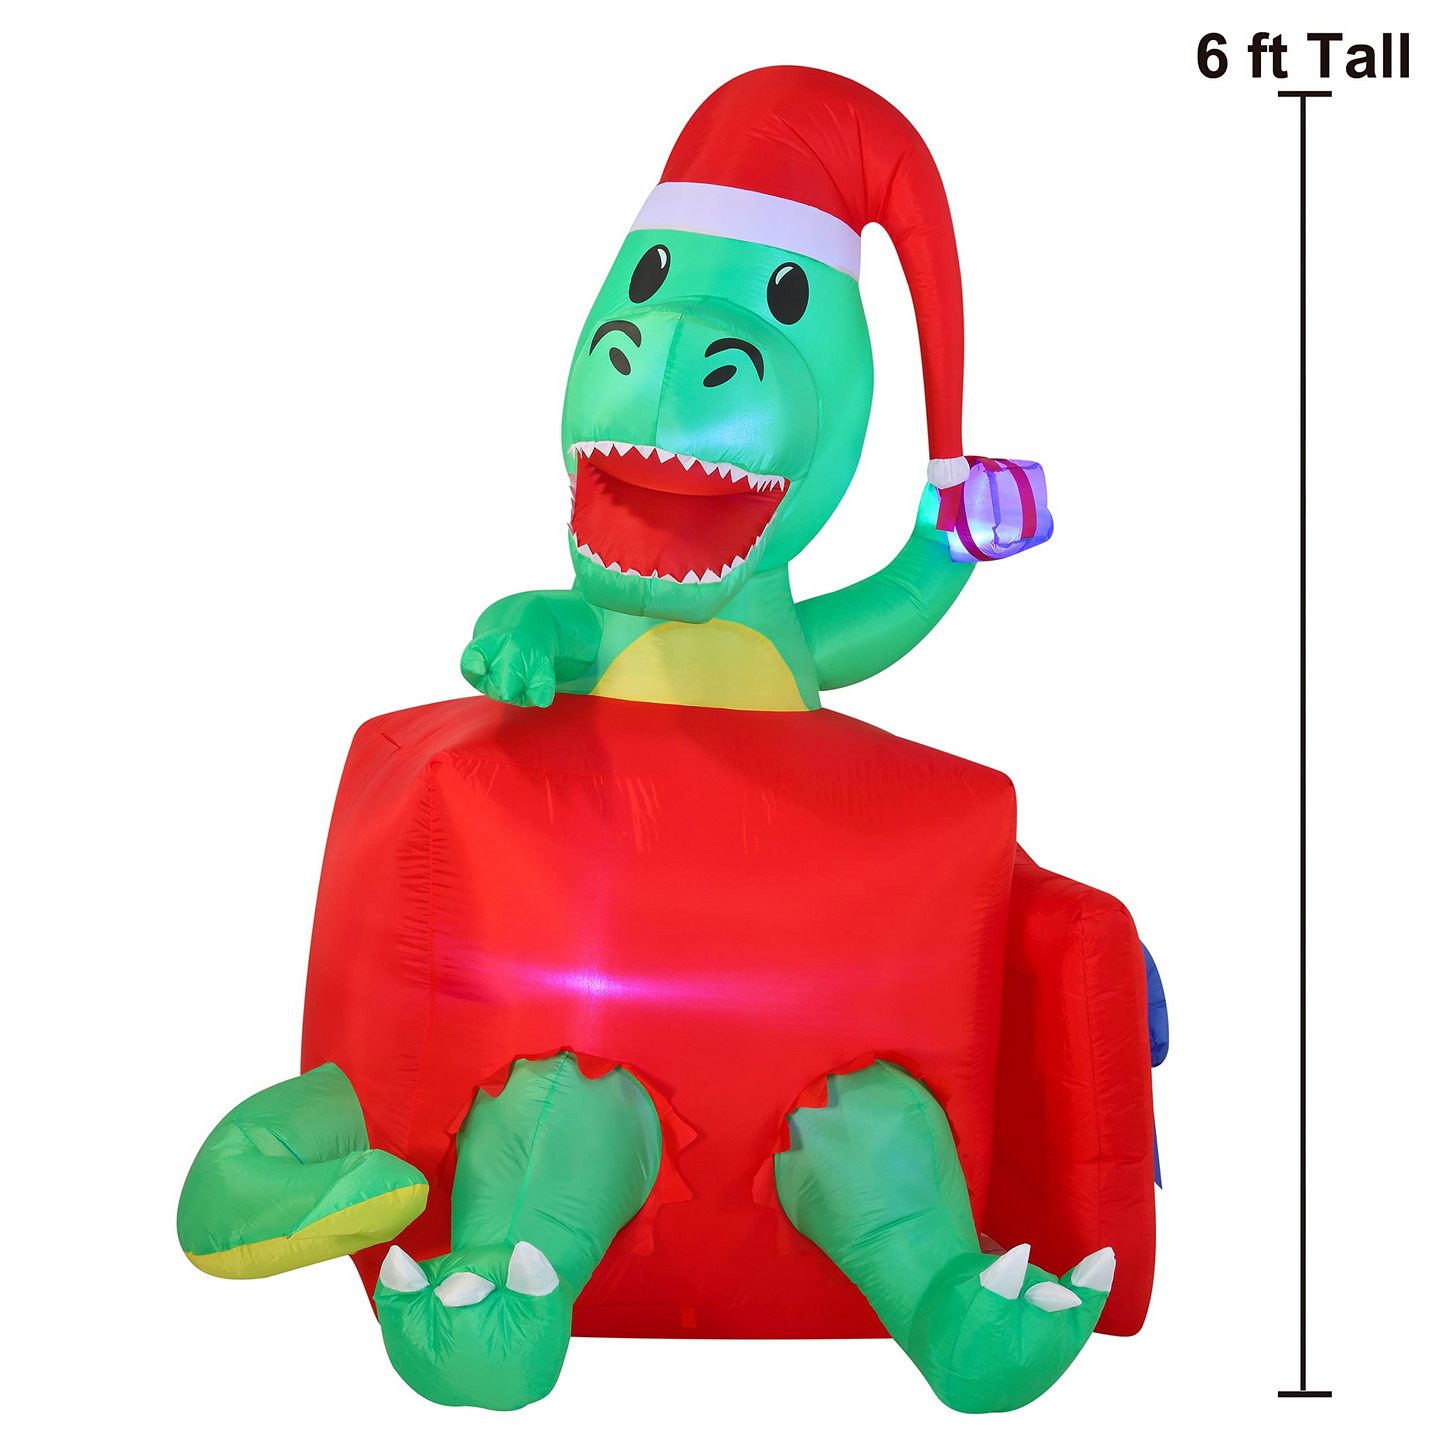 6 FT Tall Inflatable Dinosaur in a Gift Box